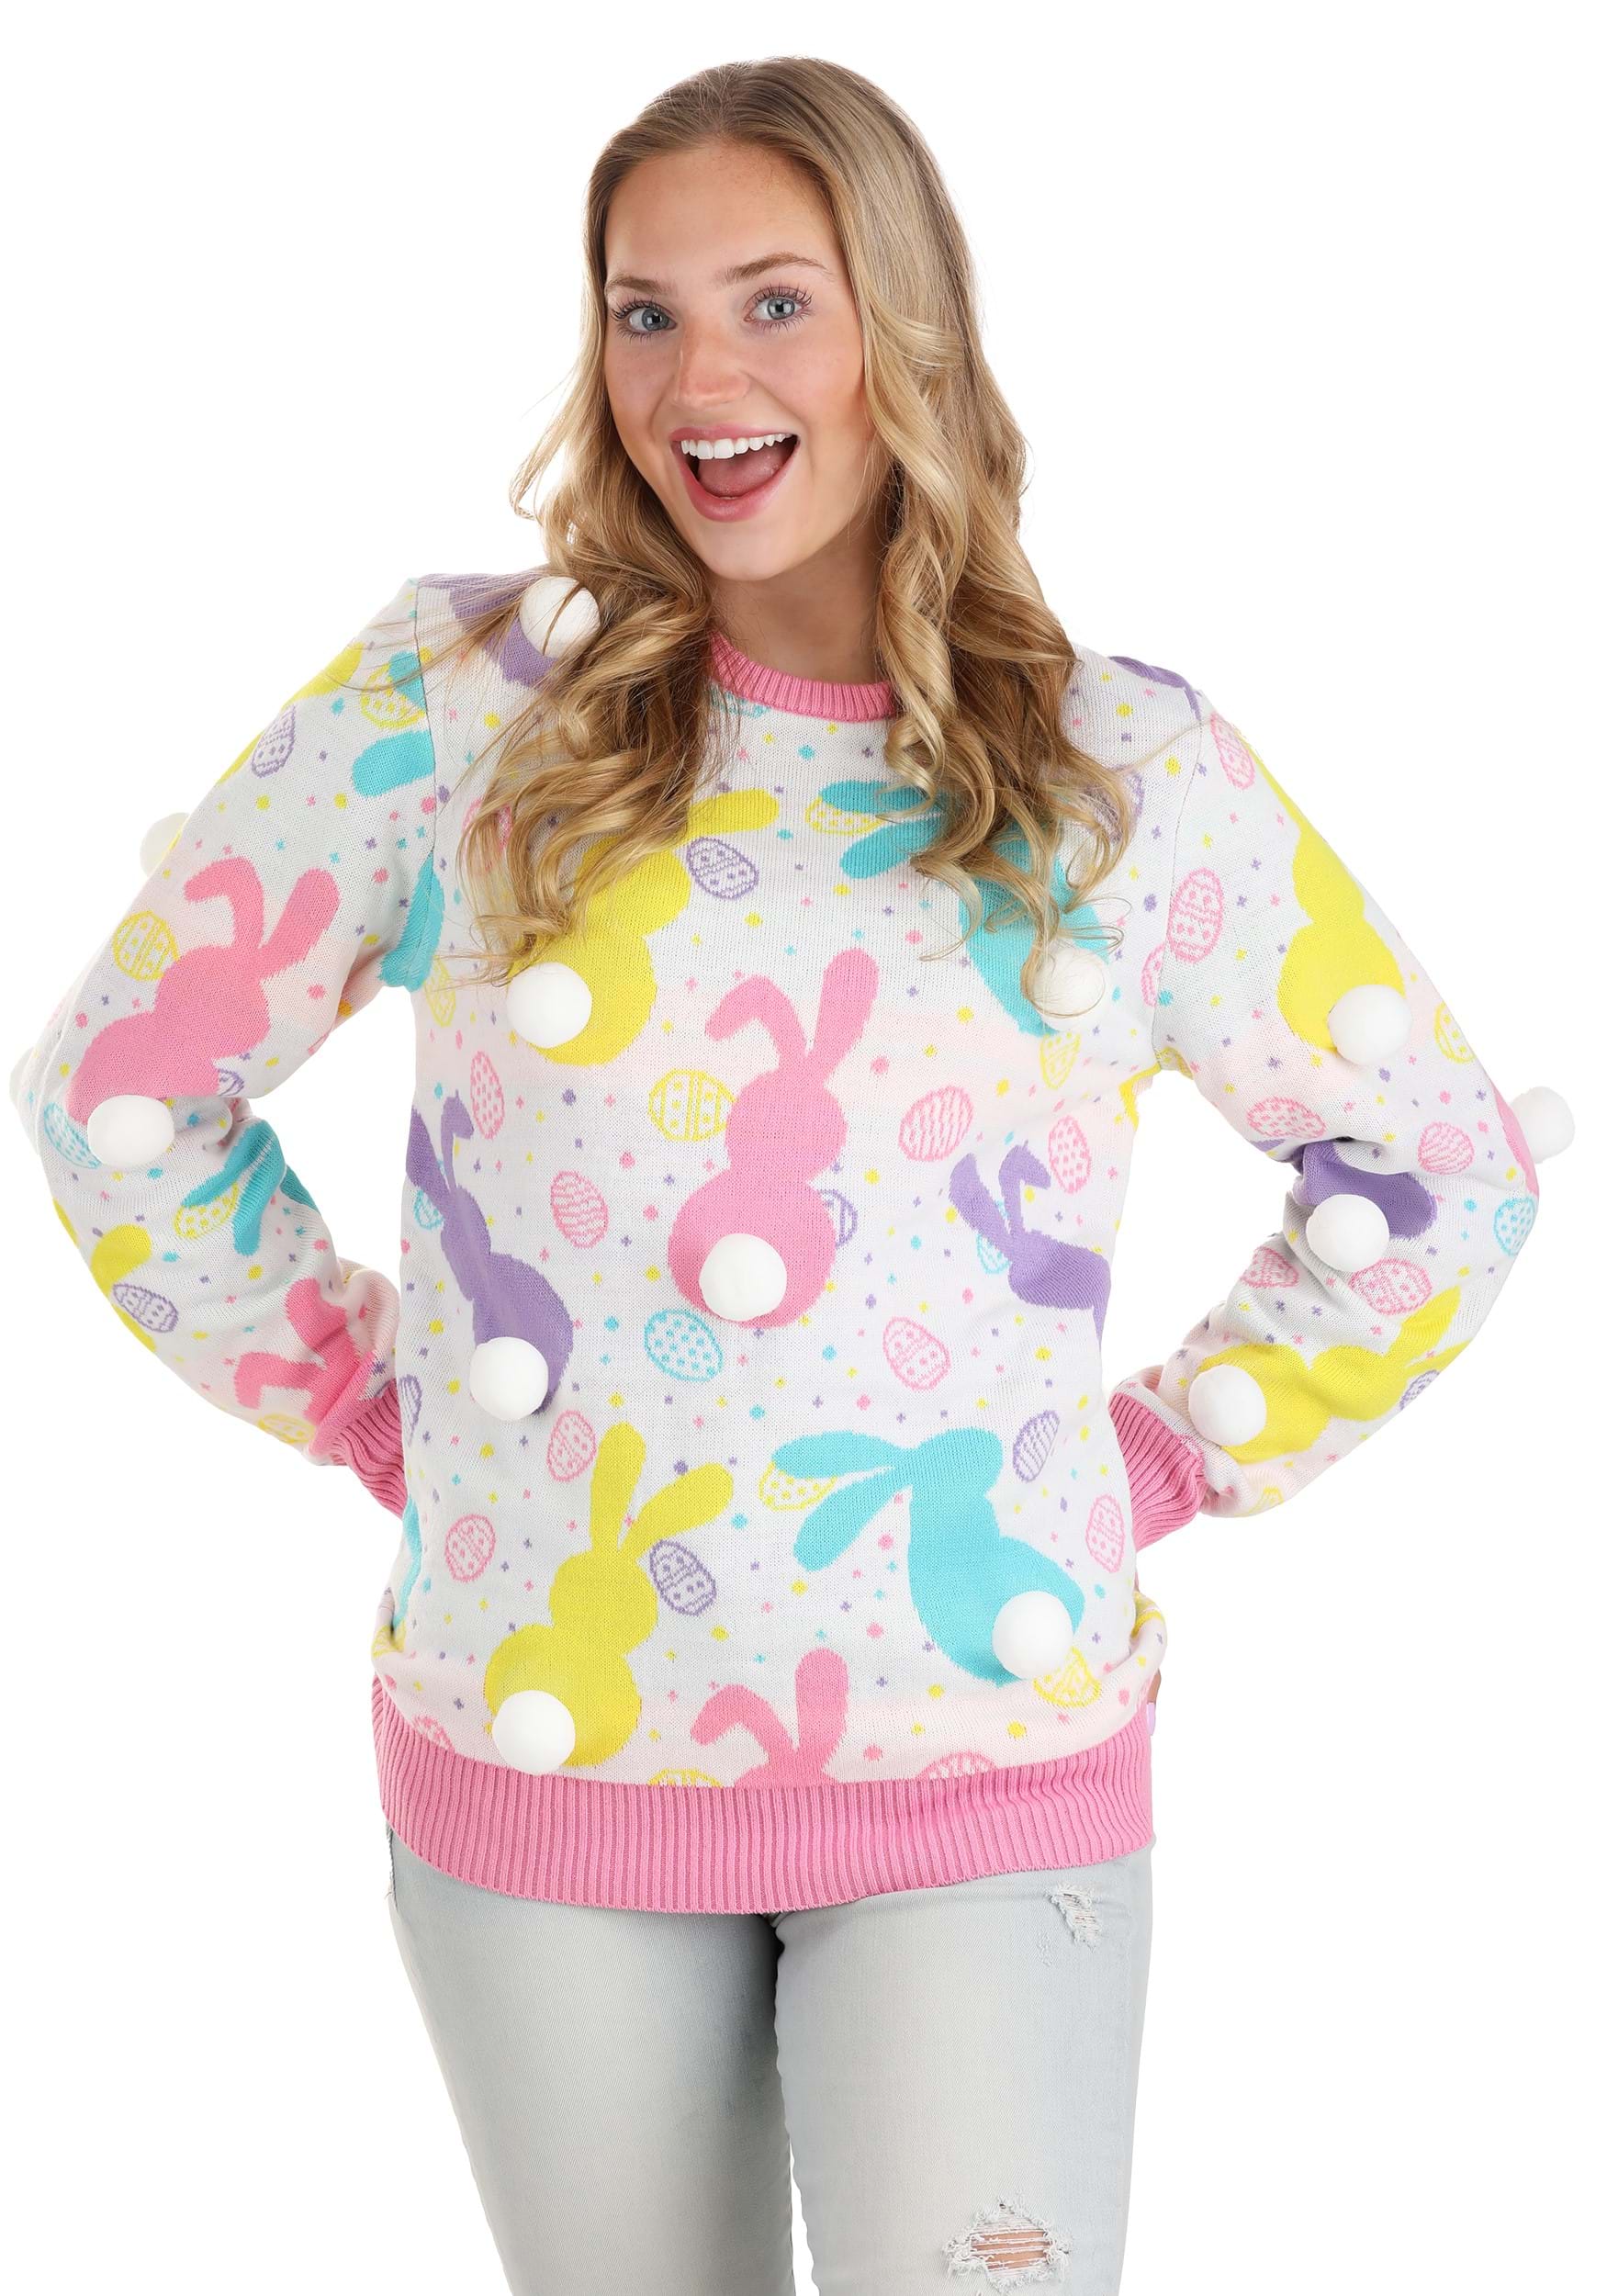 Photos - Fancy Dress FUN Wear Adult Easter Bunny Ugly Sweater Purple/Pink/White